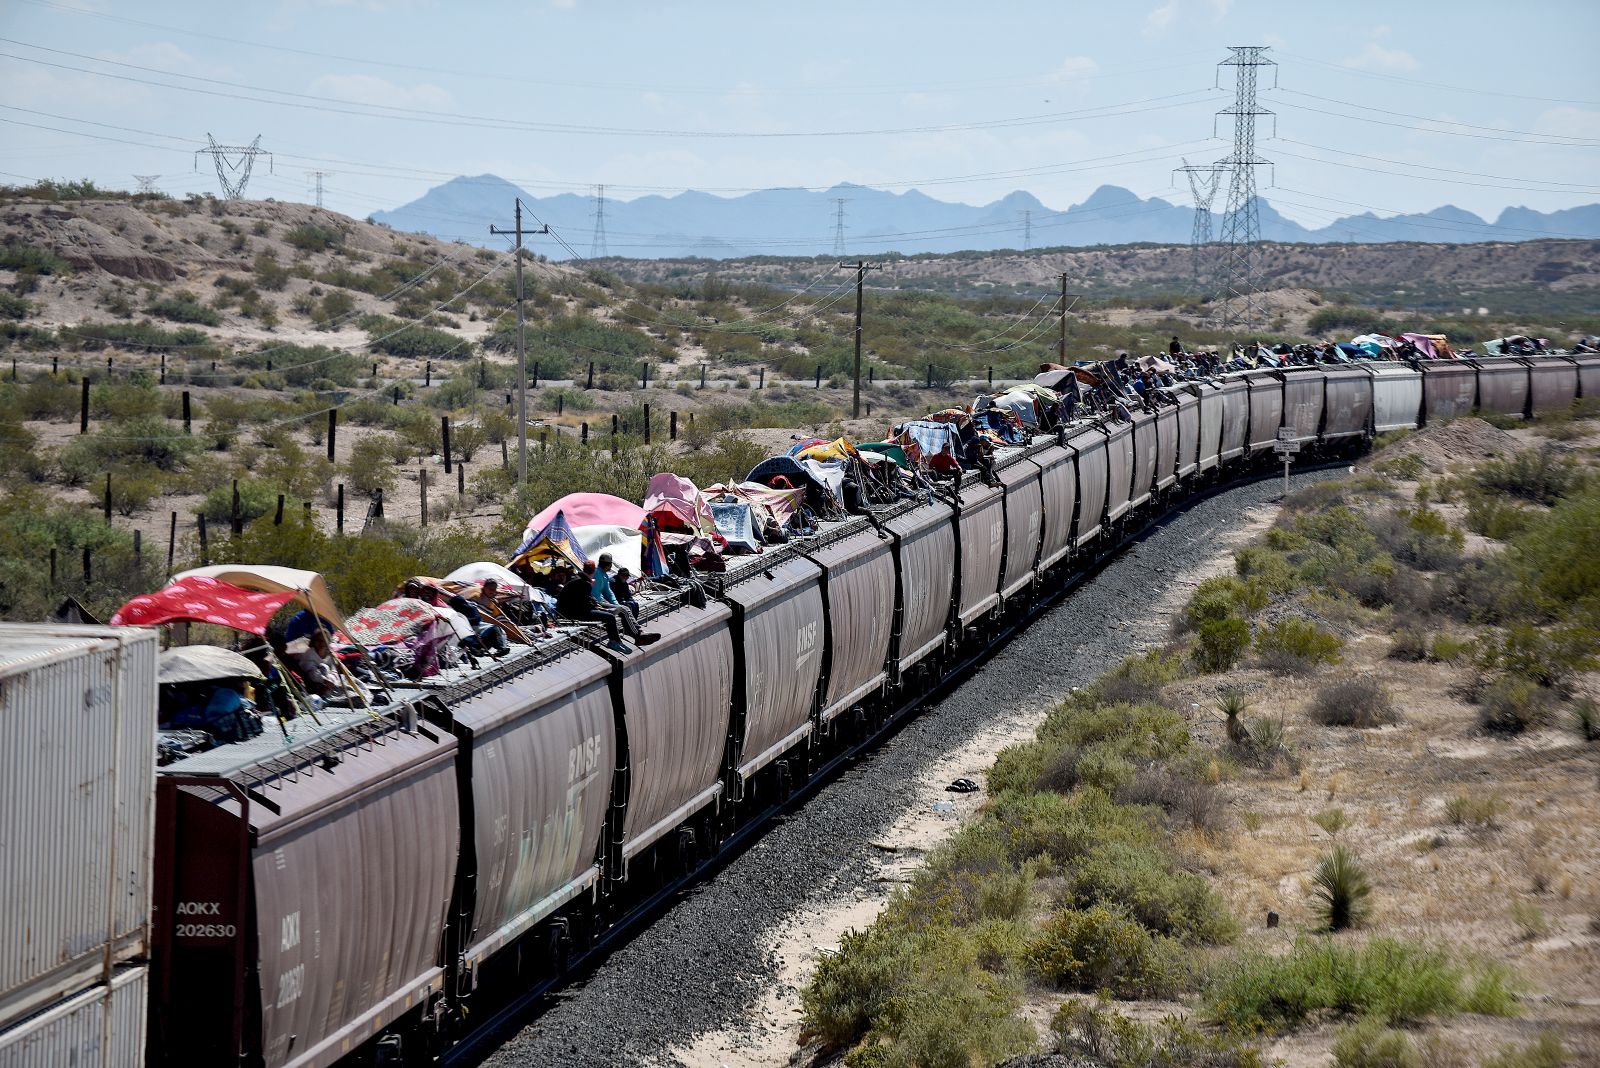 epa10898604 Migrants travel on the train known as 'the beast', near Juarez City, state of Chihuahua, Mexico, 03 October 2023. The head of the National Migration Institute (INM) of Mexico, Francisco Garduno, ruled out the possibility of thousands of migrants continuing to use a freight train that runs through the country to reach the US border.  EPA/Luis Torres